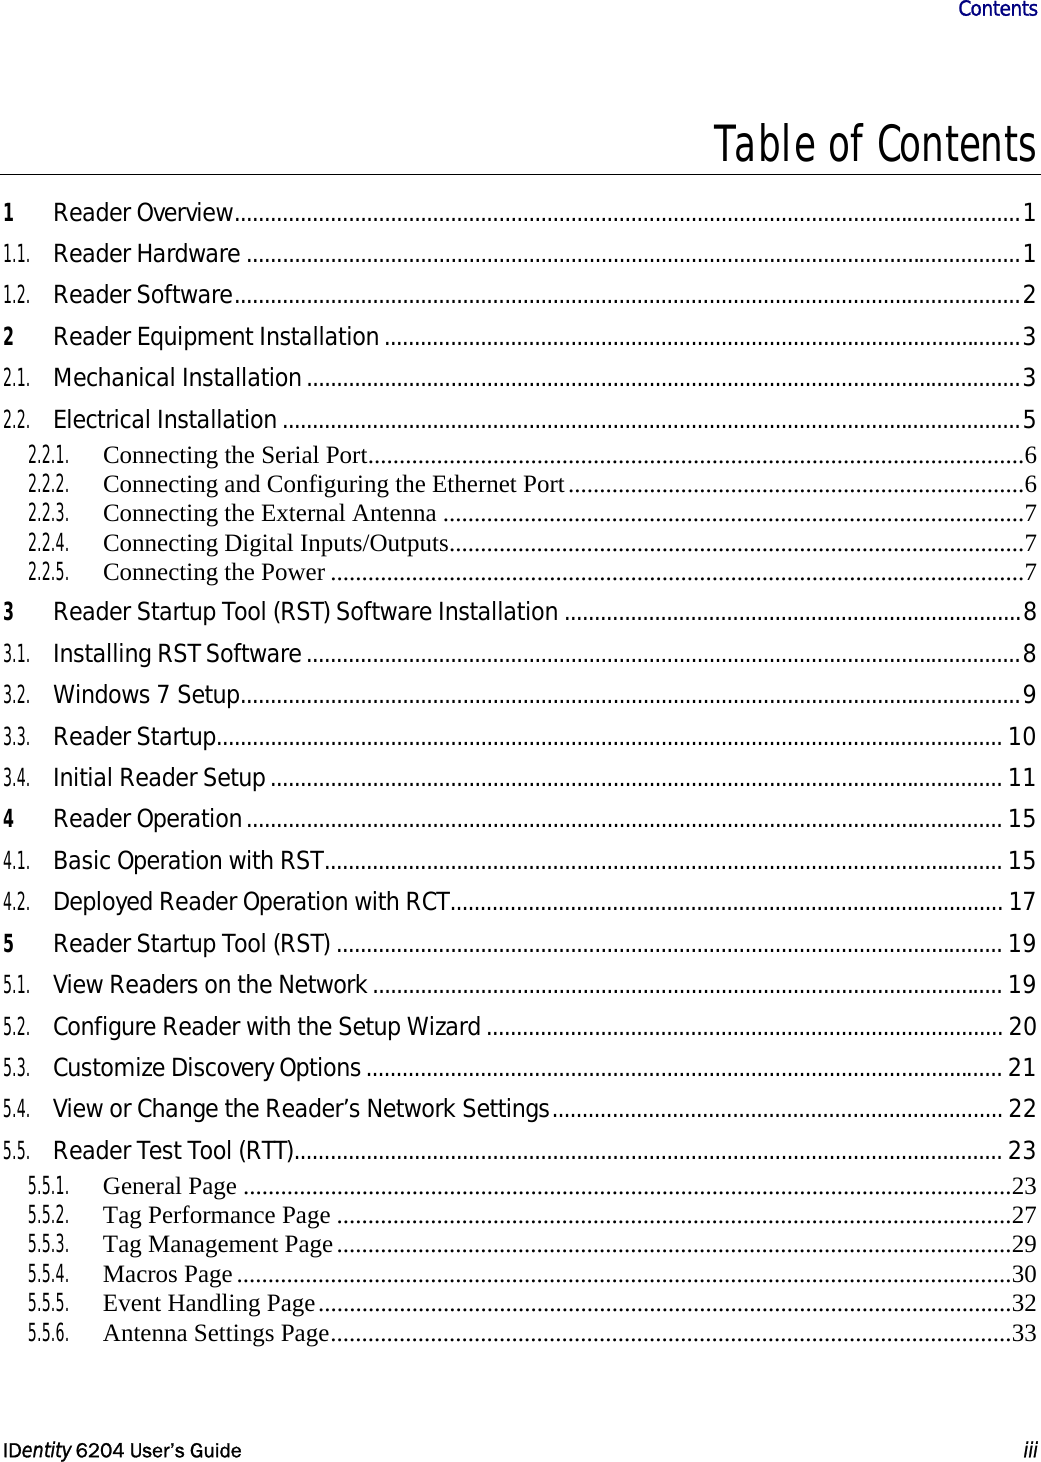                       Contents   IDentity 6204 User’s Guide  iii  Table of Contents 1 Reader Overview...................................................................................................................................1 1.1. Reader Hardware .................................................................................................................................1 1.2. Reader Software...................................................................................................................................2 2 Reader Equipment Installation..........................................................................................................3 2.1. Mechanical Installation.......................................................................................................................3 2.2. Electrical Installation...........................................................................................................................5 2.2.1.  Connecting the Serial Port.........................................................................................................6 2.2.2. Connecting and Configuring the Ethernet Port.........................................................................6 2.2.3.  Connecting the External Antenna .............................................................................................7 2.2.4. Connecting Digital Inputs/Outputs............................................................................................7 2.2.5. Connecting the Power ...............................................................................................................7 3 Reader Startup Tool (RST) Software Installation ............................................................................8 3.1. Installing RST Software.......................................................................................................................8 3.2. Windows 7 Setup..................................................................................................................................9 3.3. Reader Startup................................................................................................................................... 10 3.4. Initial Reader Setup.......................................................................................................................... 11 4 Reader Operation.............................................................................................................................. 15 4.1. Basic Operation with RST................................................................................................................. 15 4.2. Deployed Reader Operation with RCT............................................................................................ 17 5 Reader Startup Tool (RST) ............................................................................................................... 19 5.1. View Readers on the Network......................................................................................................... 19 5.2. Configure Reader with the Setup Wizard...................................................................................... 20 5.3. Customize Discovery Options.......................................................................................................... 21 5.4. View or Change the Reader’s Network Settings........................................................................... 22 5.5. Reader Test Tool (RTT)...................................................................................................................... 23 5.5.1. General Page ...........................................................................................................................23 5.5.2.  Tag Performance Page ............................................................................................................27 5.5.3.  Tag Management Page............................................................................................................29 5.5.4. Macros Page ............................................................................................................................30 5.5.5.  Event Handling Page...............................................................................................................32 5.5.6.  Antenna Settings Page.............................................................................................................33 